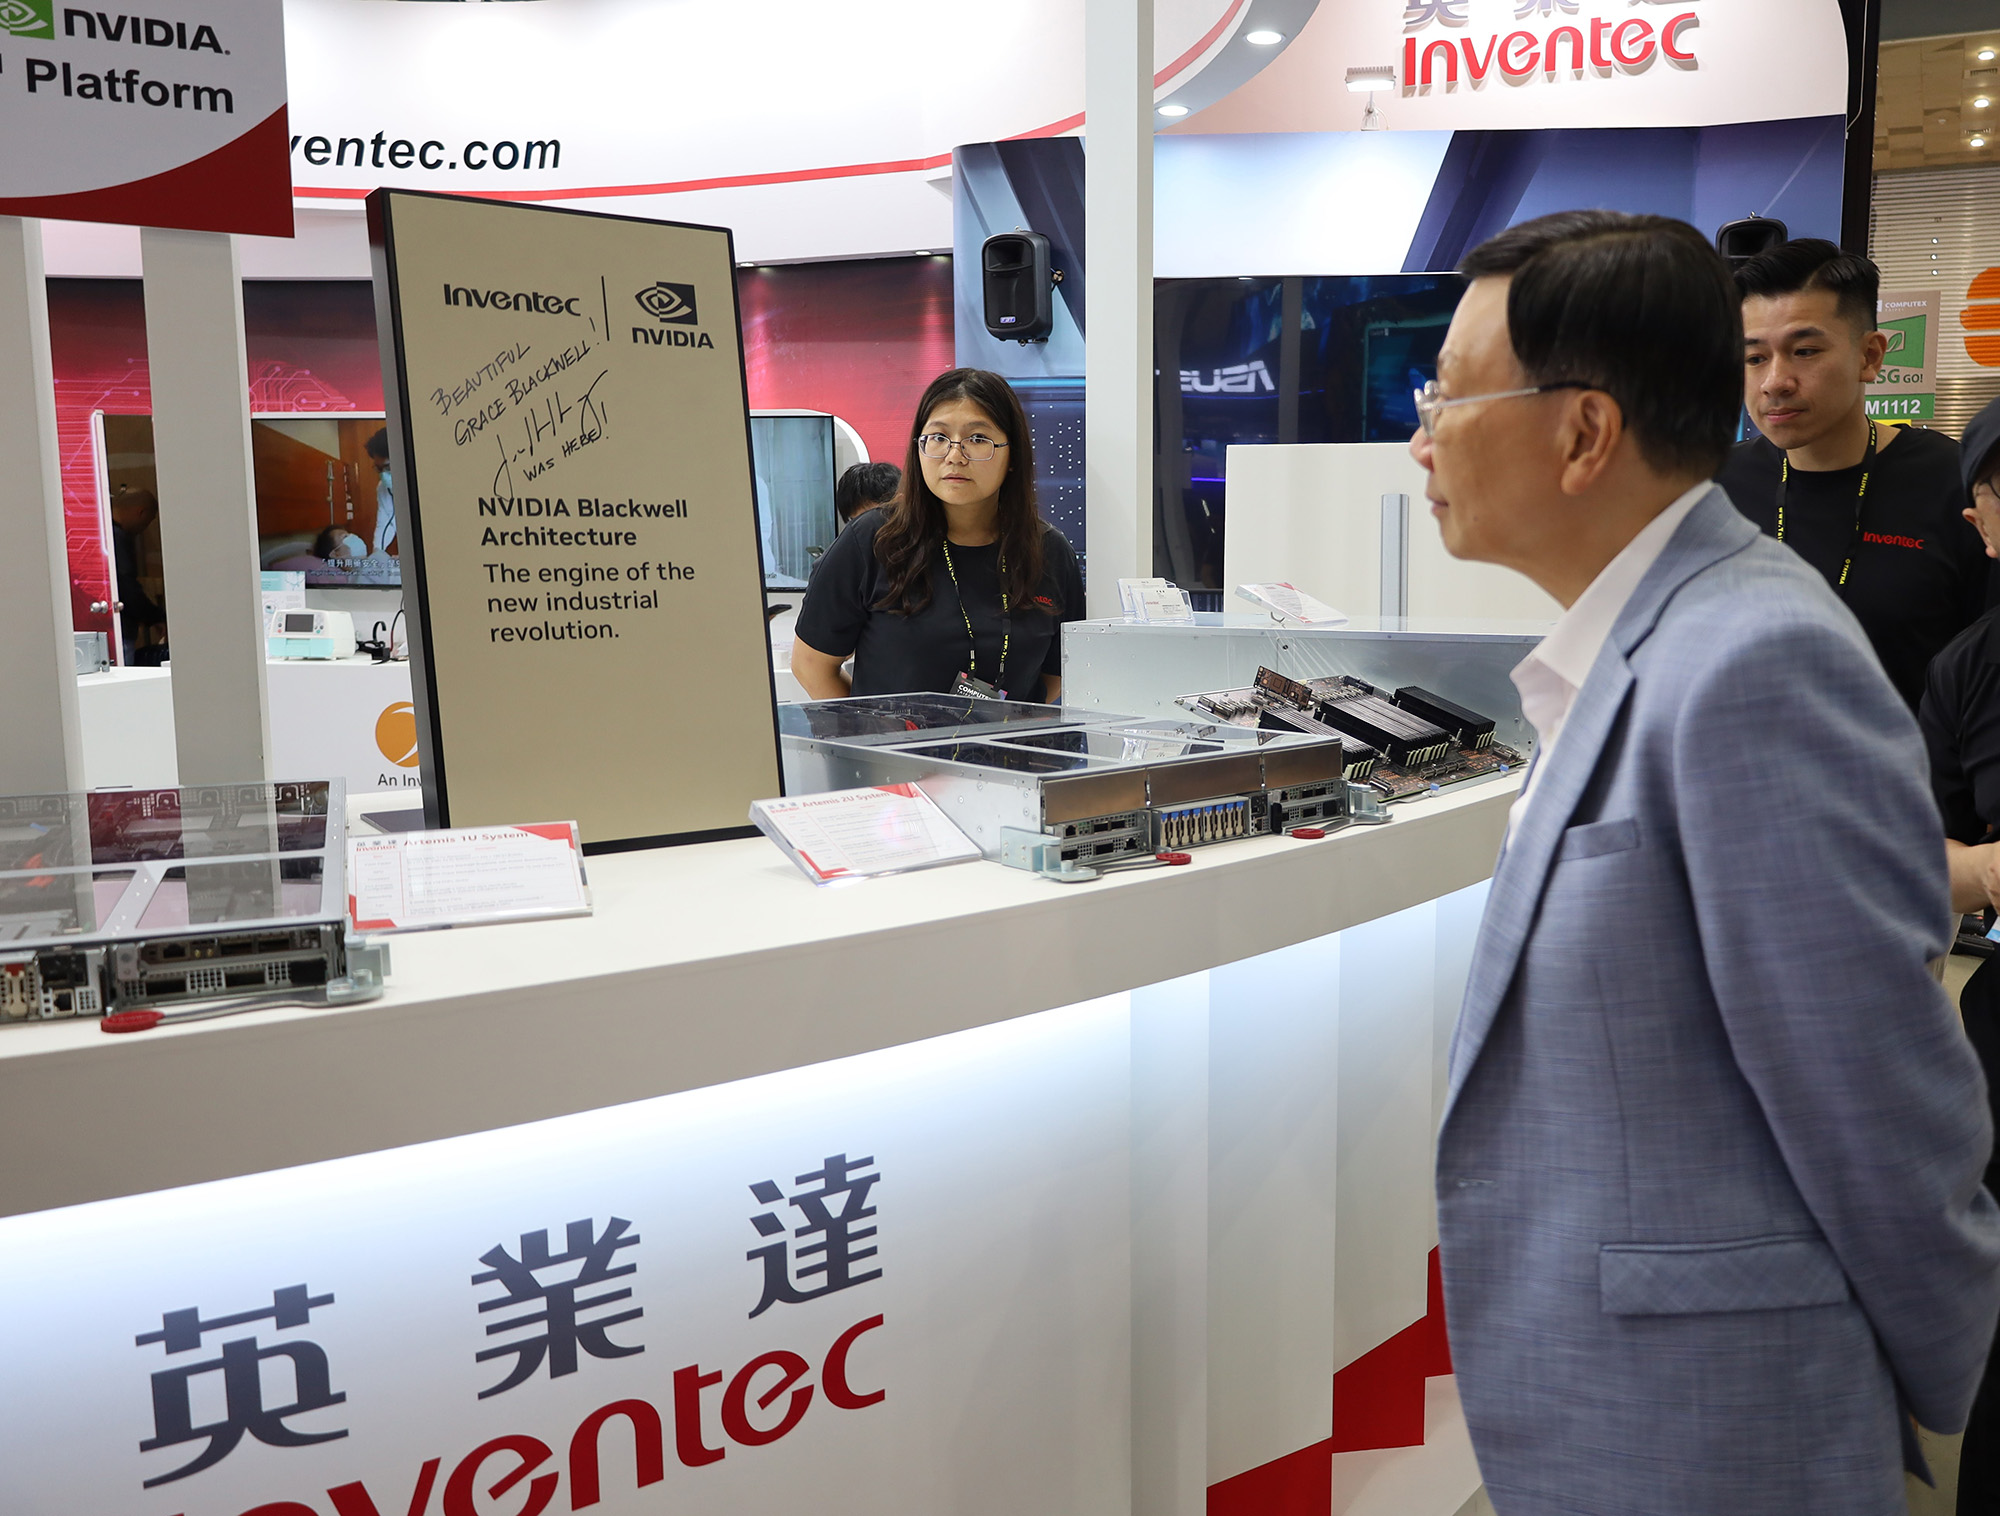 President Jeffrey J.P. Tsai of Asia University (right) at Inventec's booth during COMPUTEX, observing NVIDIA co-founder Jensen Jen-hsun Huang 's signature on the latest NVIDIA GB200 NVL72 AI cabinet used by manufacturing partner Inventec, learning about its applications